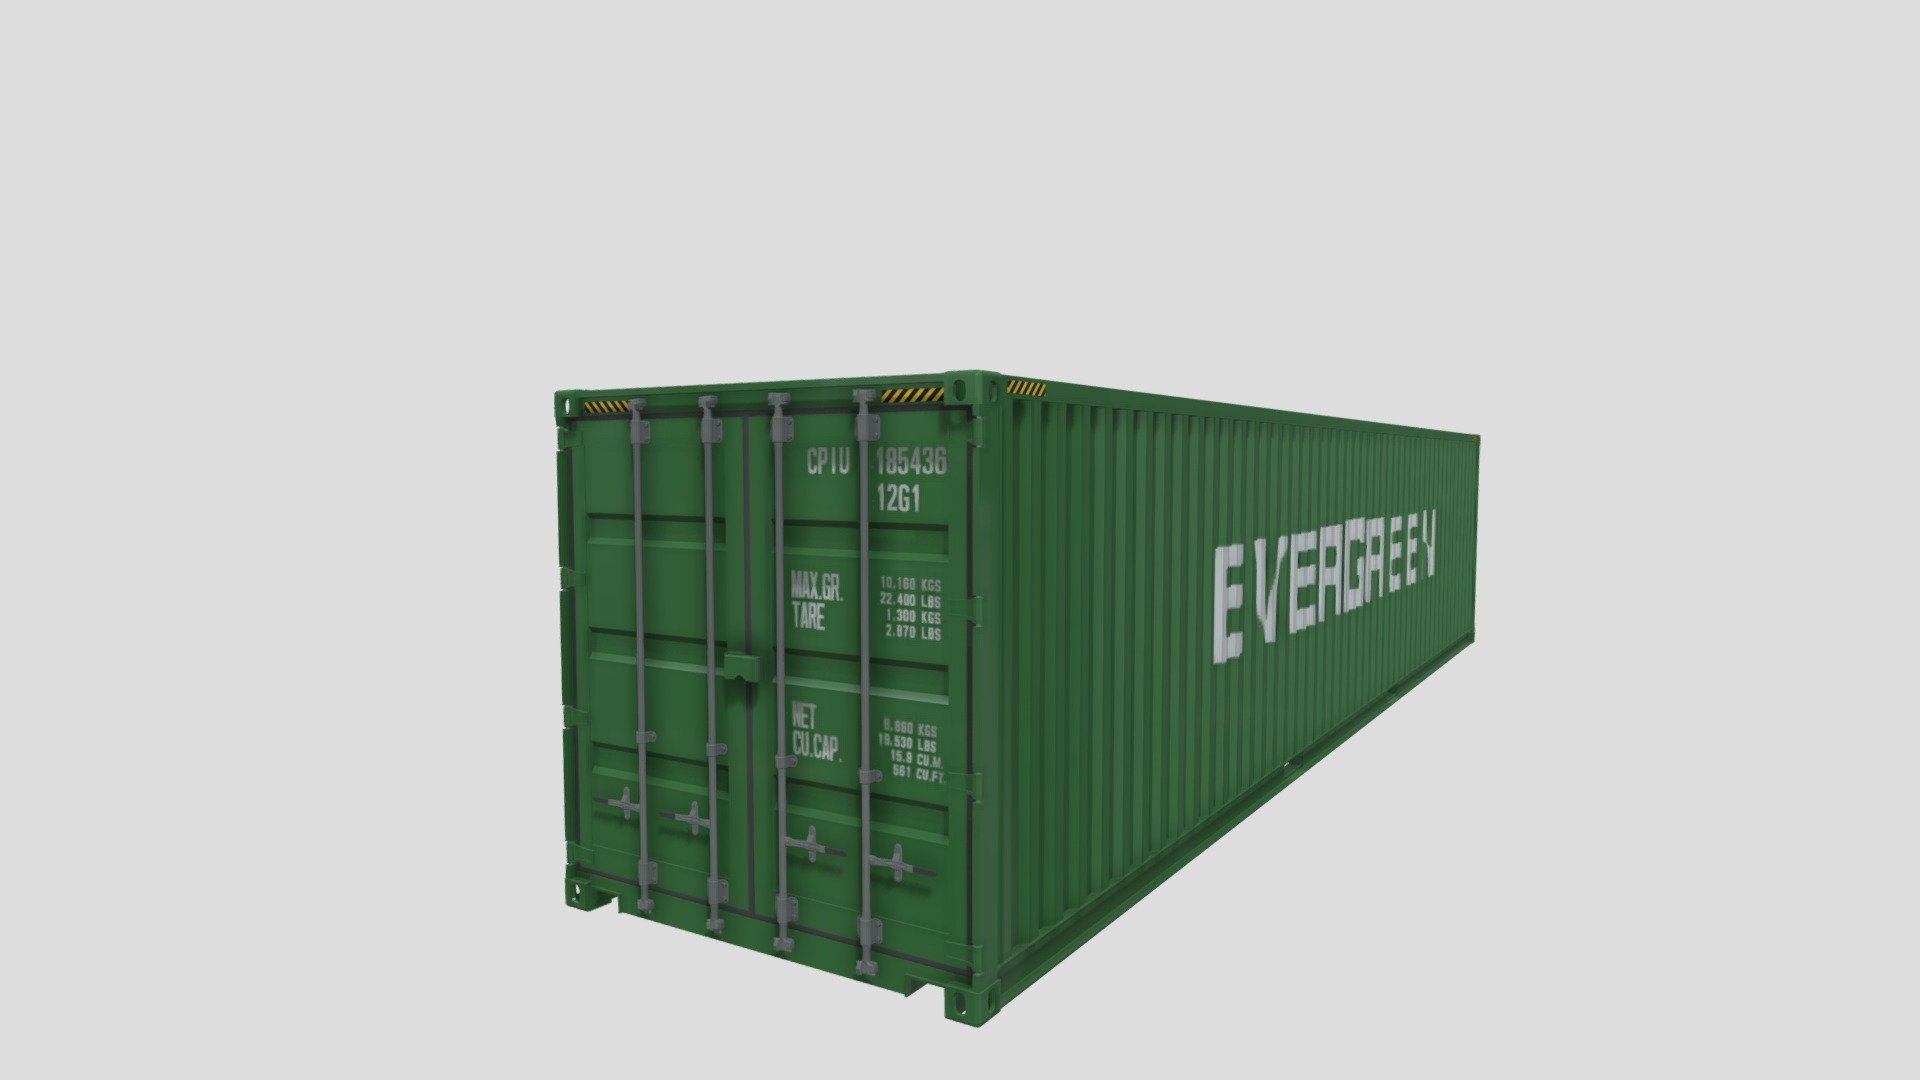 A very accurate model of a 40 Feet Shipping container .

The model has the interior modeled, and there is a sixth archive with a .blend with the doors open.

The model comes in five formats:
-.blend, animated and rigged, rendered with cycles, as seen in the images;
-.obj, with materials applied and textures;
-.dae, with materials applied and textures;
-.stl, ready to print in 3D;
-.fbx;

This 3d model was originally created in Blender 2.76 and rendered with Cycles.
The model has materials applied in all formats, and are ready to import and render.
The model is built strictly out of quads and is subdivisable.

It comes in separate parts, named correctly for the sake of convenience.

For any problems please feel free to contact me.

Don't forget to rate and enjoy! - Shipping Container Evergreen - Buy Royalty Free 3D model by dragosburian 3d model